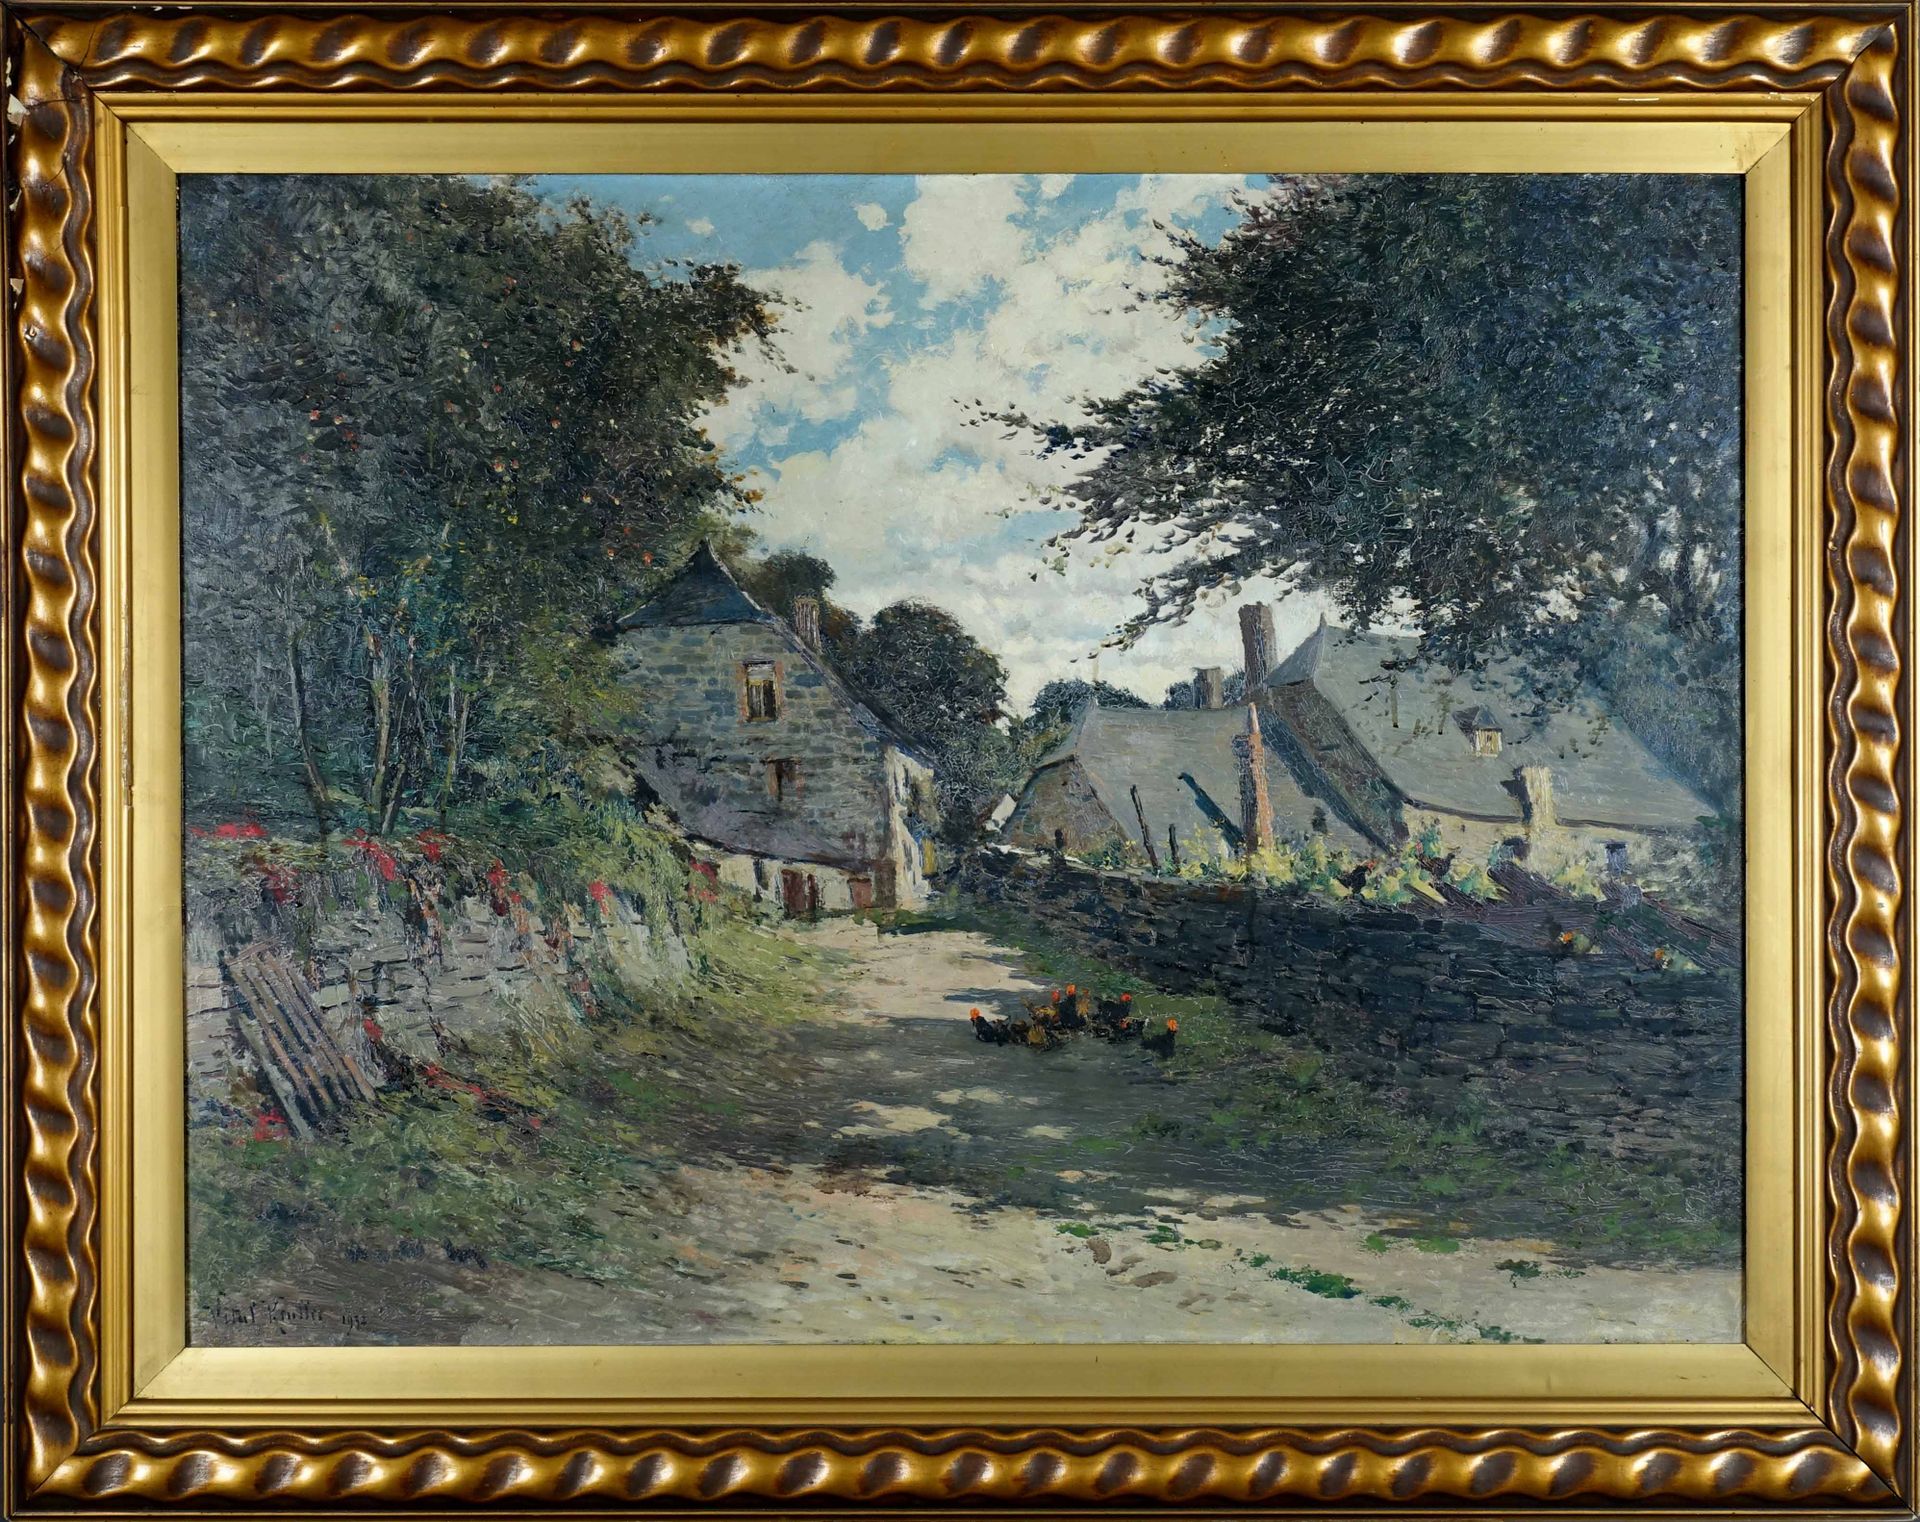 Vital Keuller (1866-1945). The entrance of the village (dated 1932). Oil on pane&hellip;